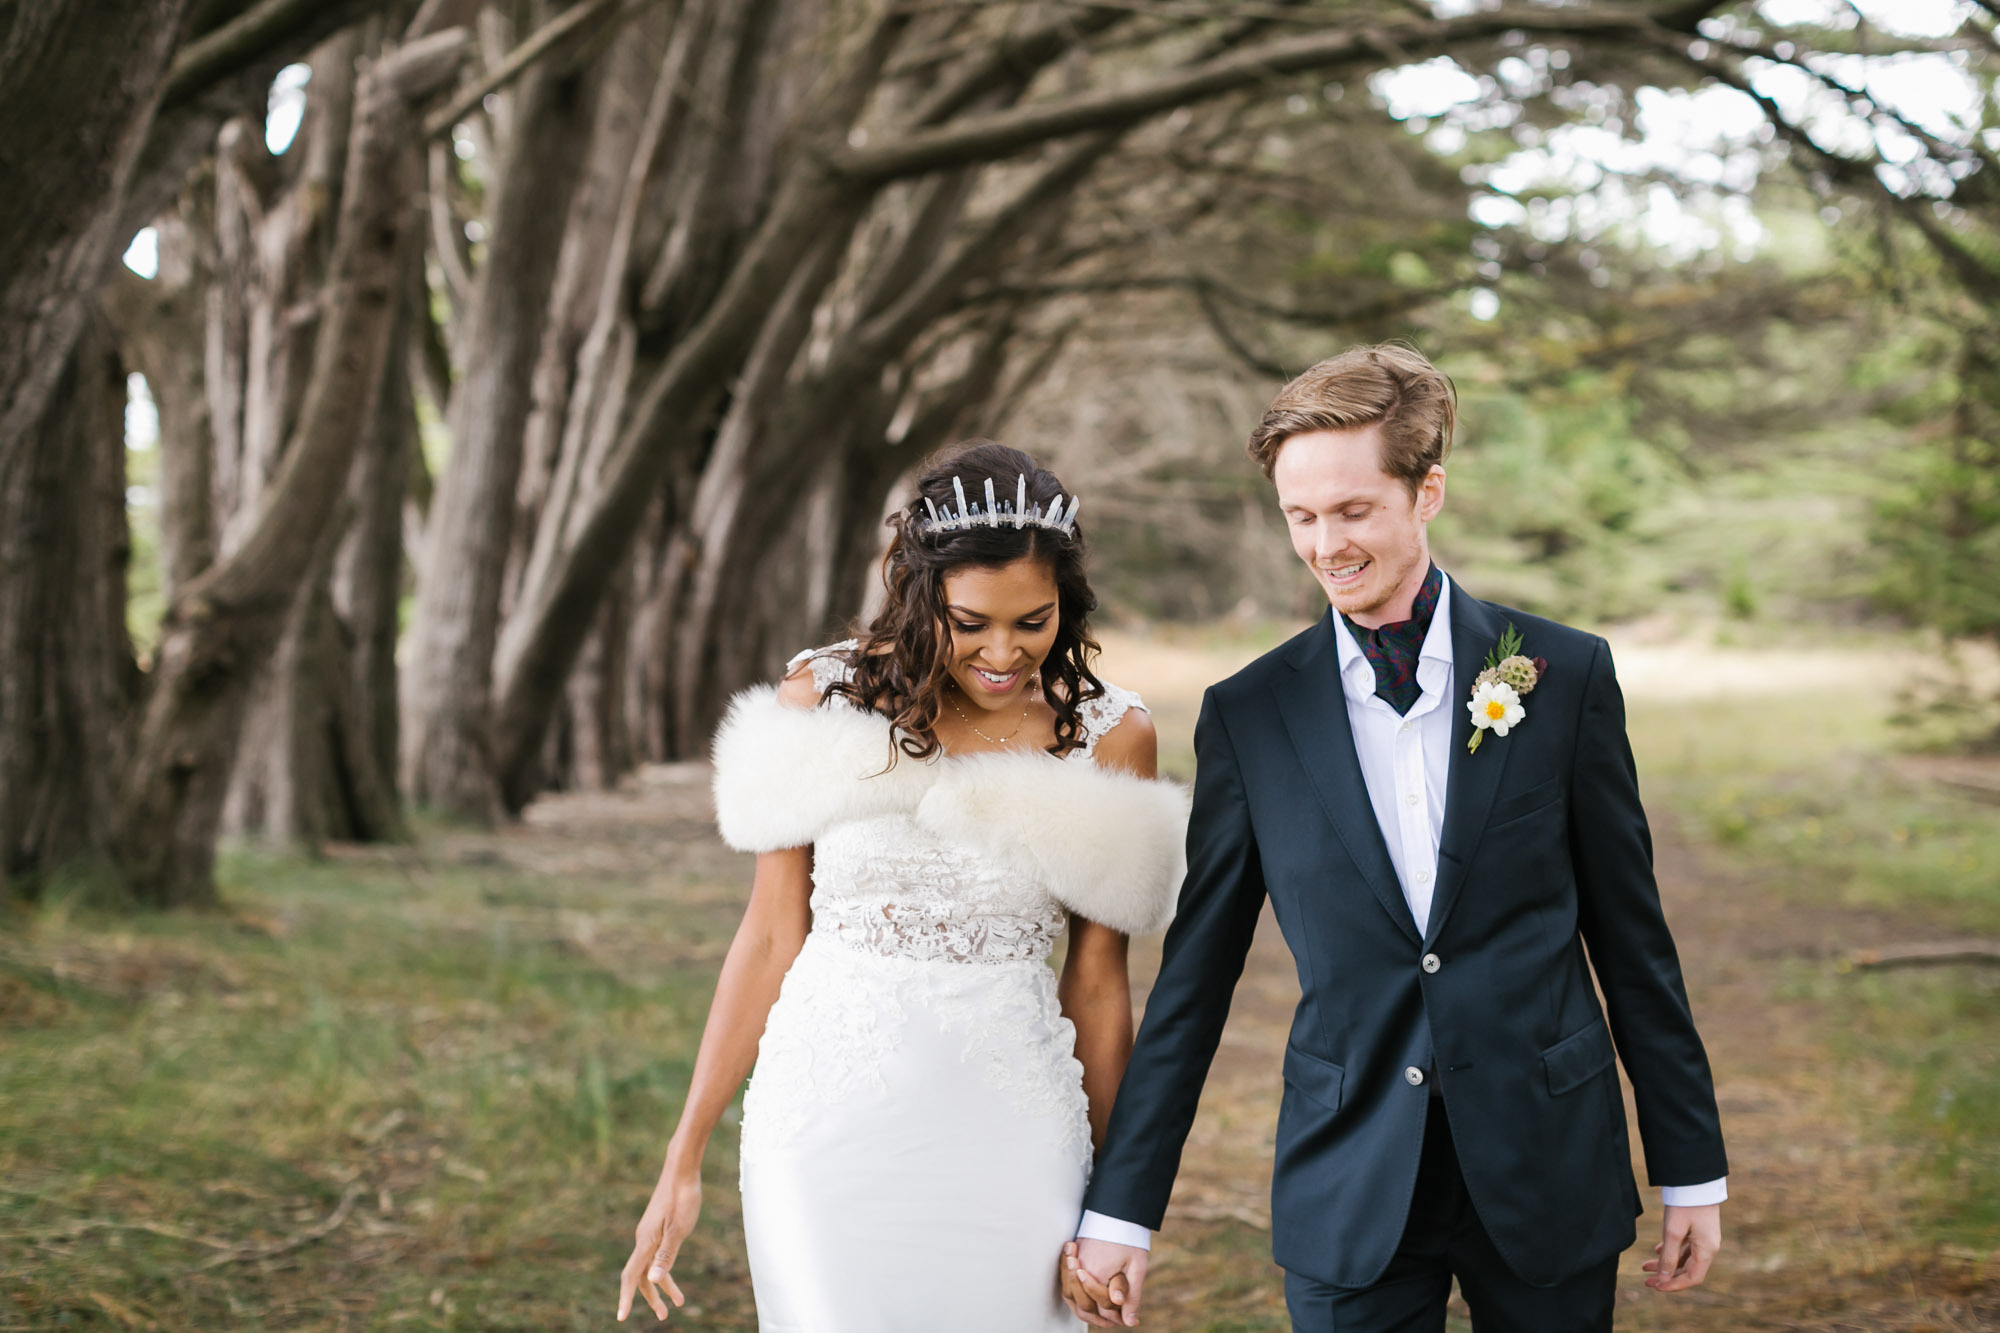 Bride wearing crystal crown and white fur stole walks holding hands with her husband